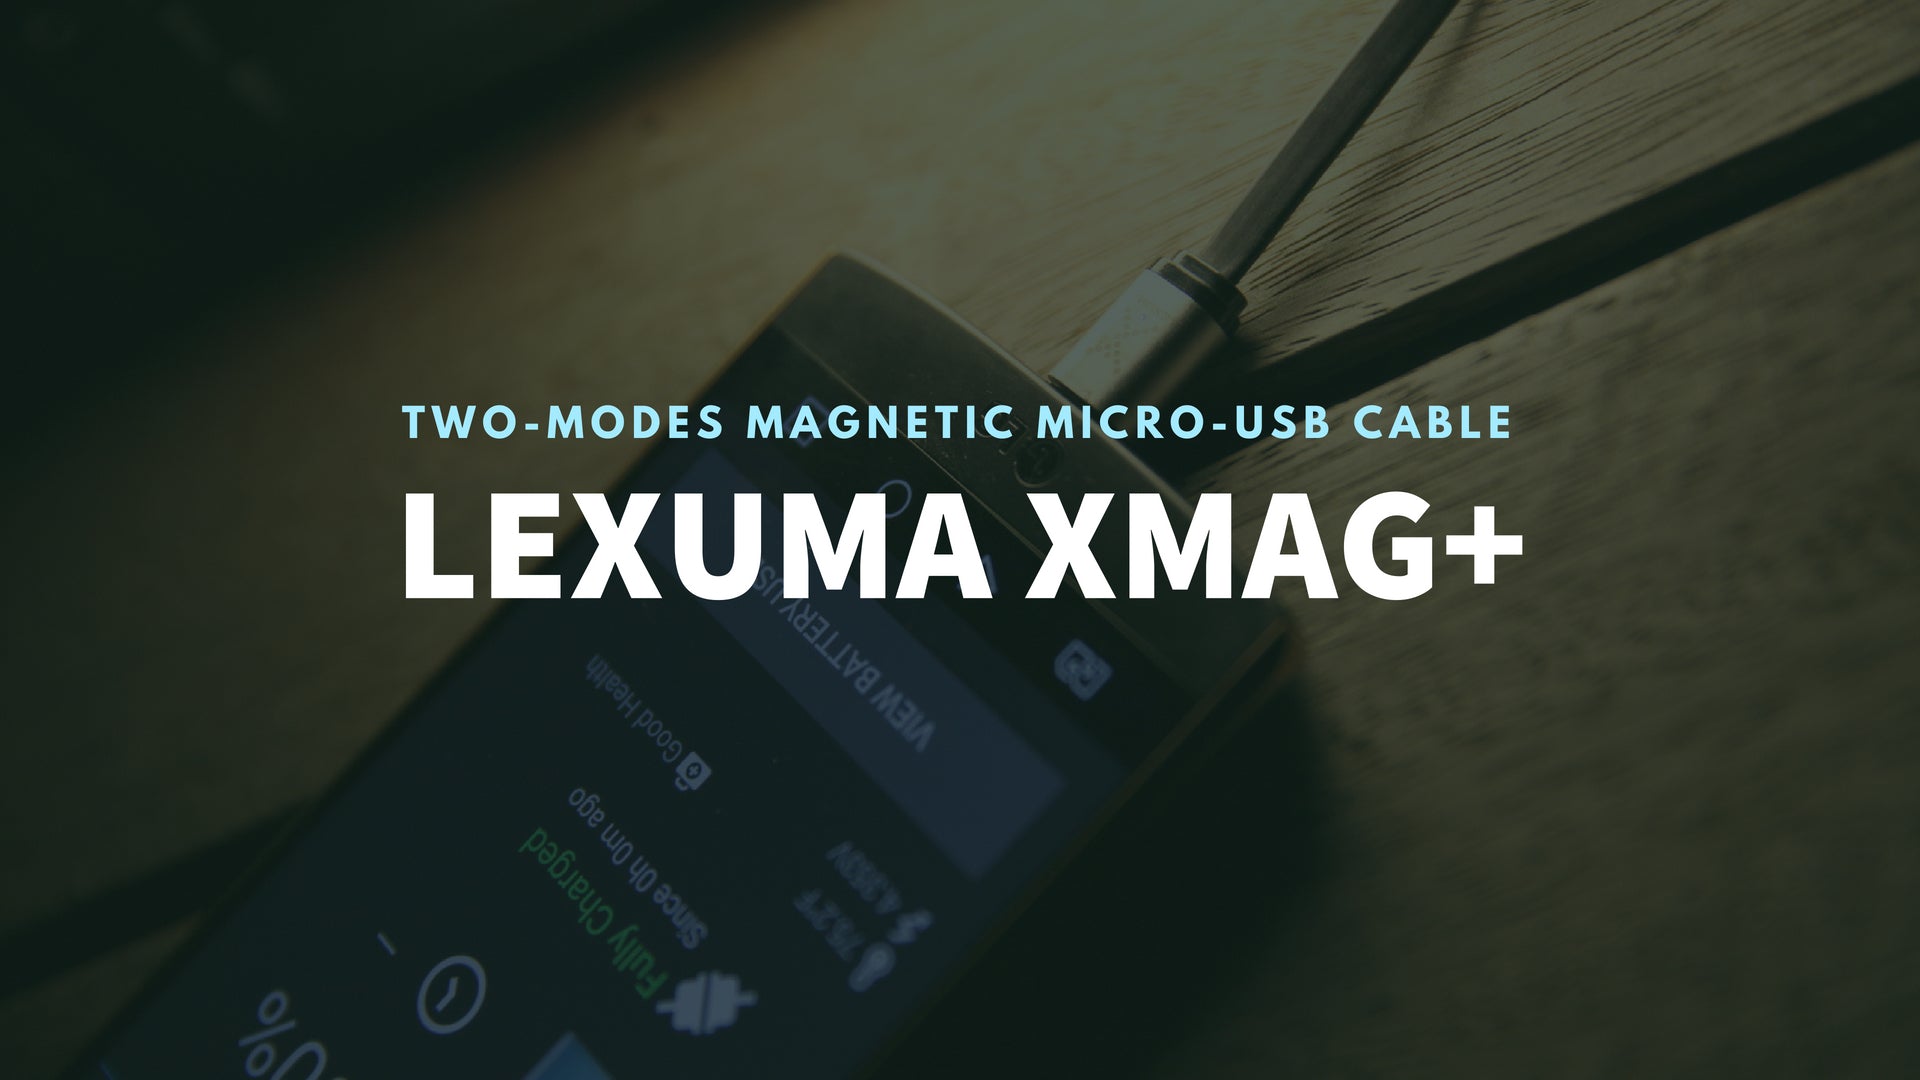 Lexuma 辣數碼 mirco usb 充電線 XMAG-MUC-PLUS Magnetic Micro USB Charging Cable micro usb magnetic adapter magnetic charging cable usb c best magnetic charging cable 2019 micro usb to magnetic charger adapter magnetic connector magnetic charging cable review volta magnetic cable magnetic charging cable data transfer magnetic charging cable android magnetic usb adapter magnetic charging cable type c trilobi magnetic cable apple device accessories 2 in 1 charger cable trilobi magnetic cable banner